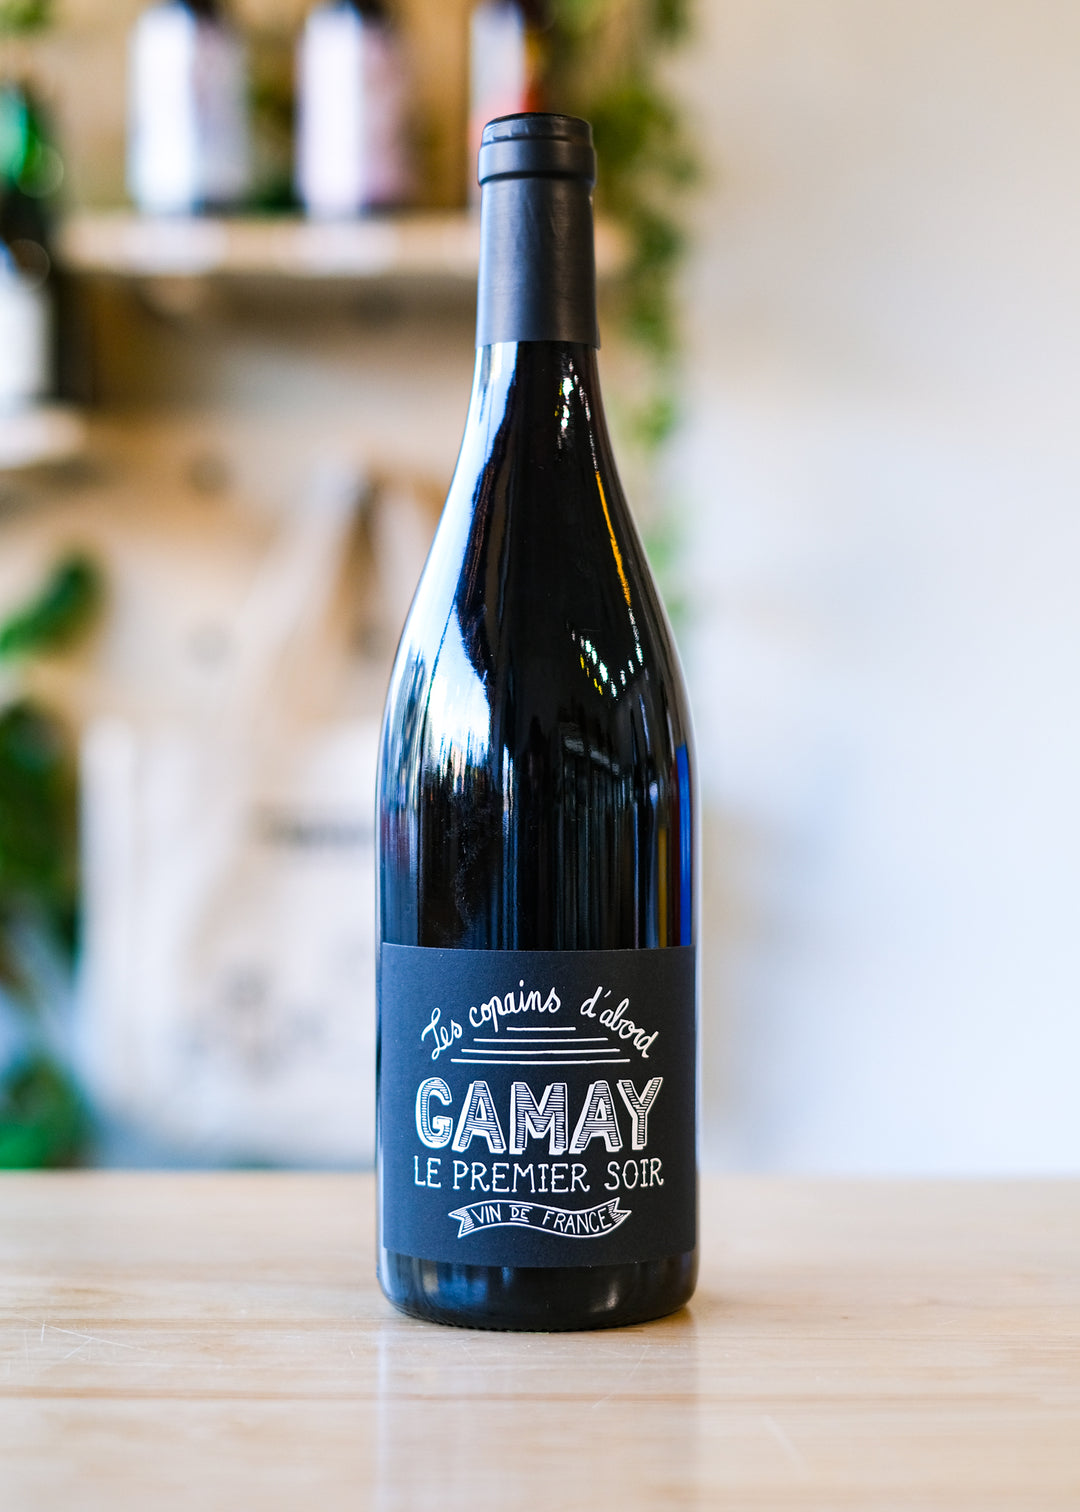 Les Copains D'abord 'Gamay'